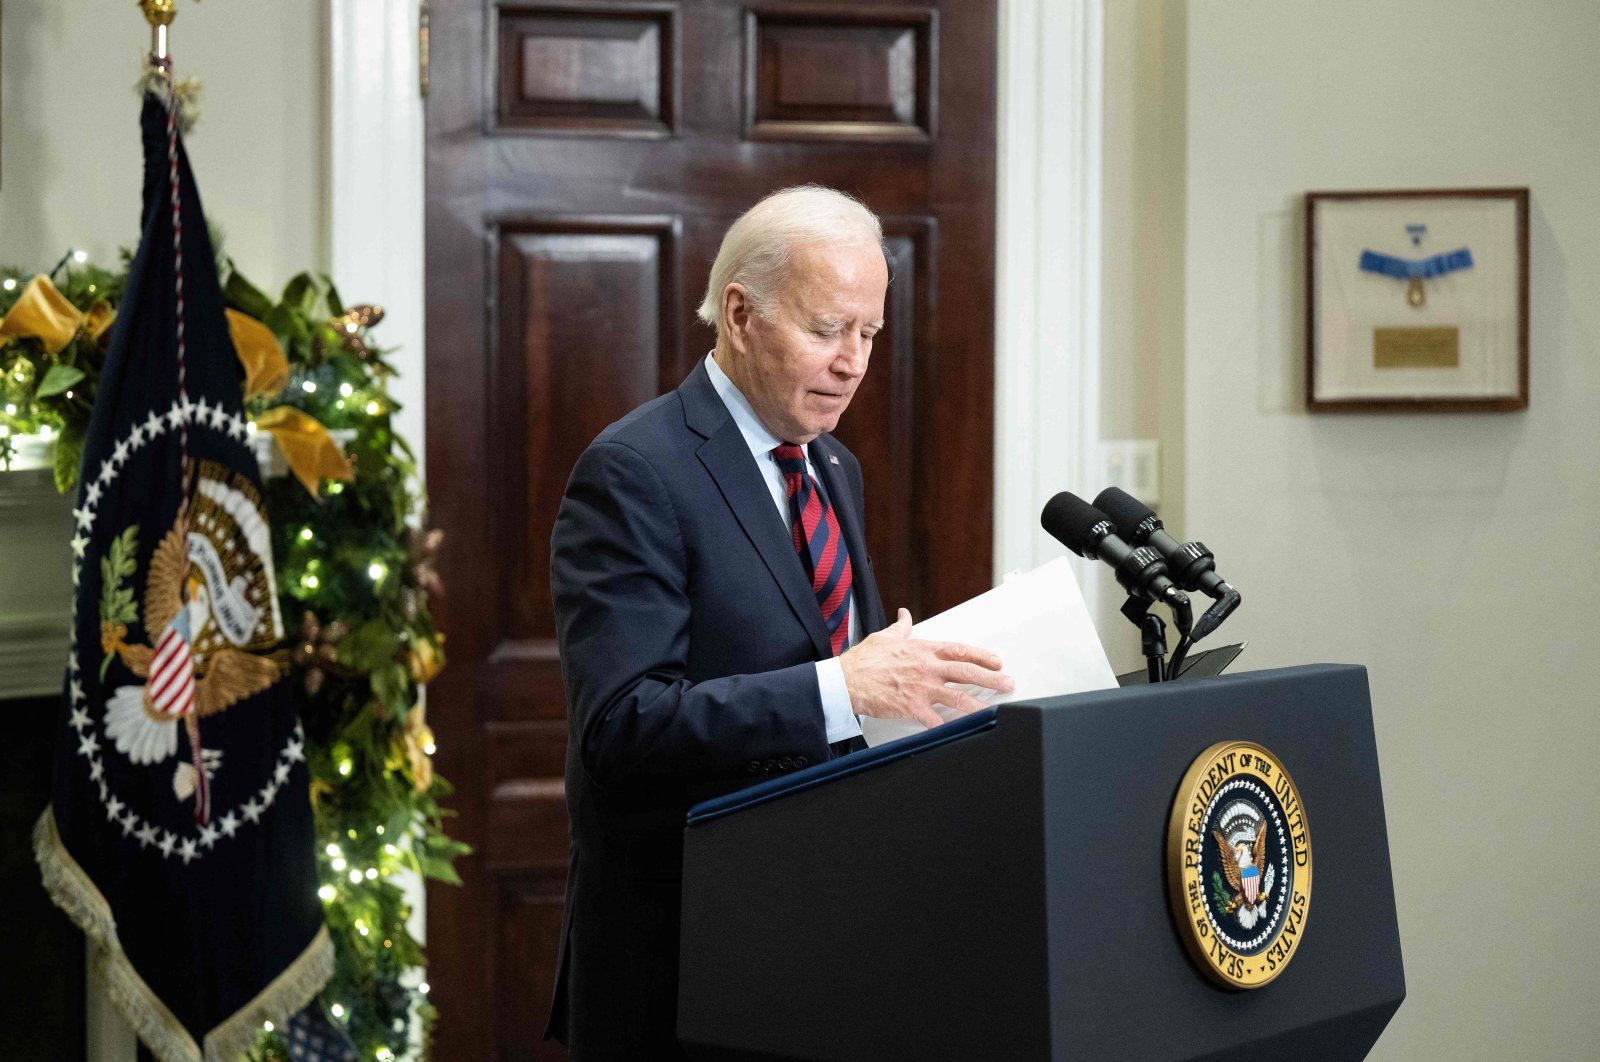 U.S. President Joe Biden speaks as he prepares to sign a resolution to avert a nationwide rail shutdown, in the Roosevelt Room of the White House in Washington, D.C., U.S., Dec. 2, 2022. (AFP Photo)